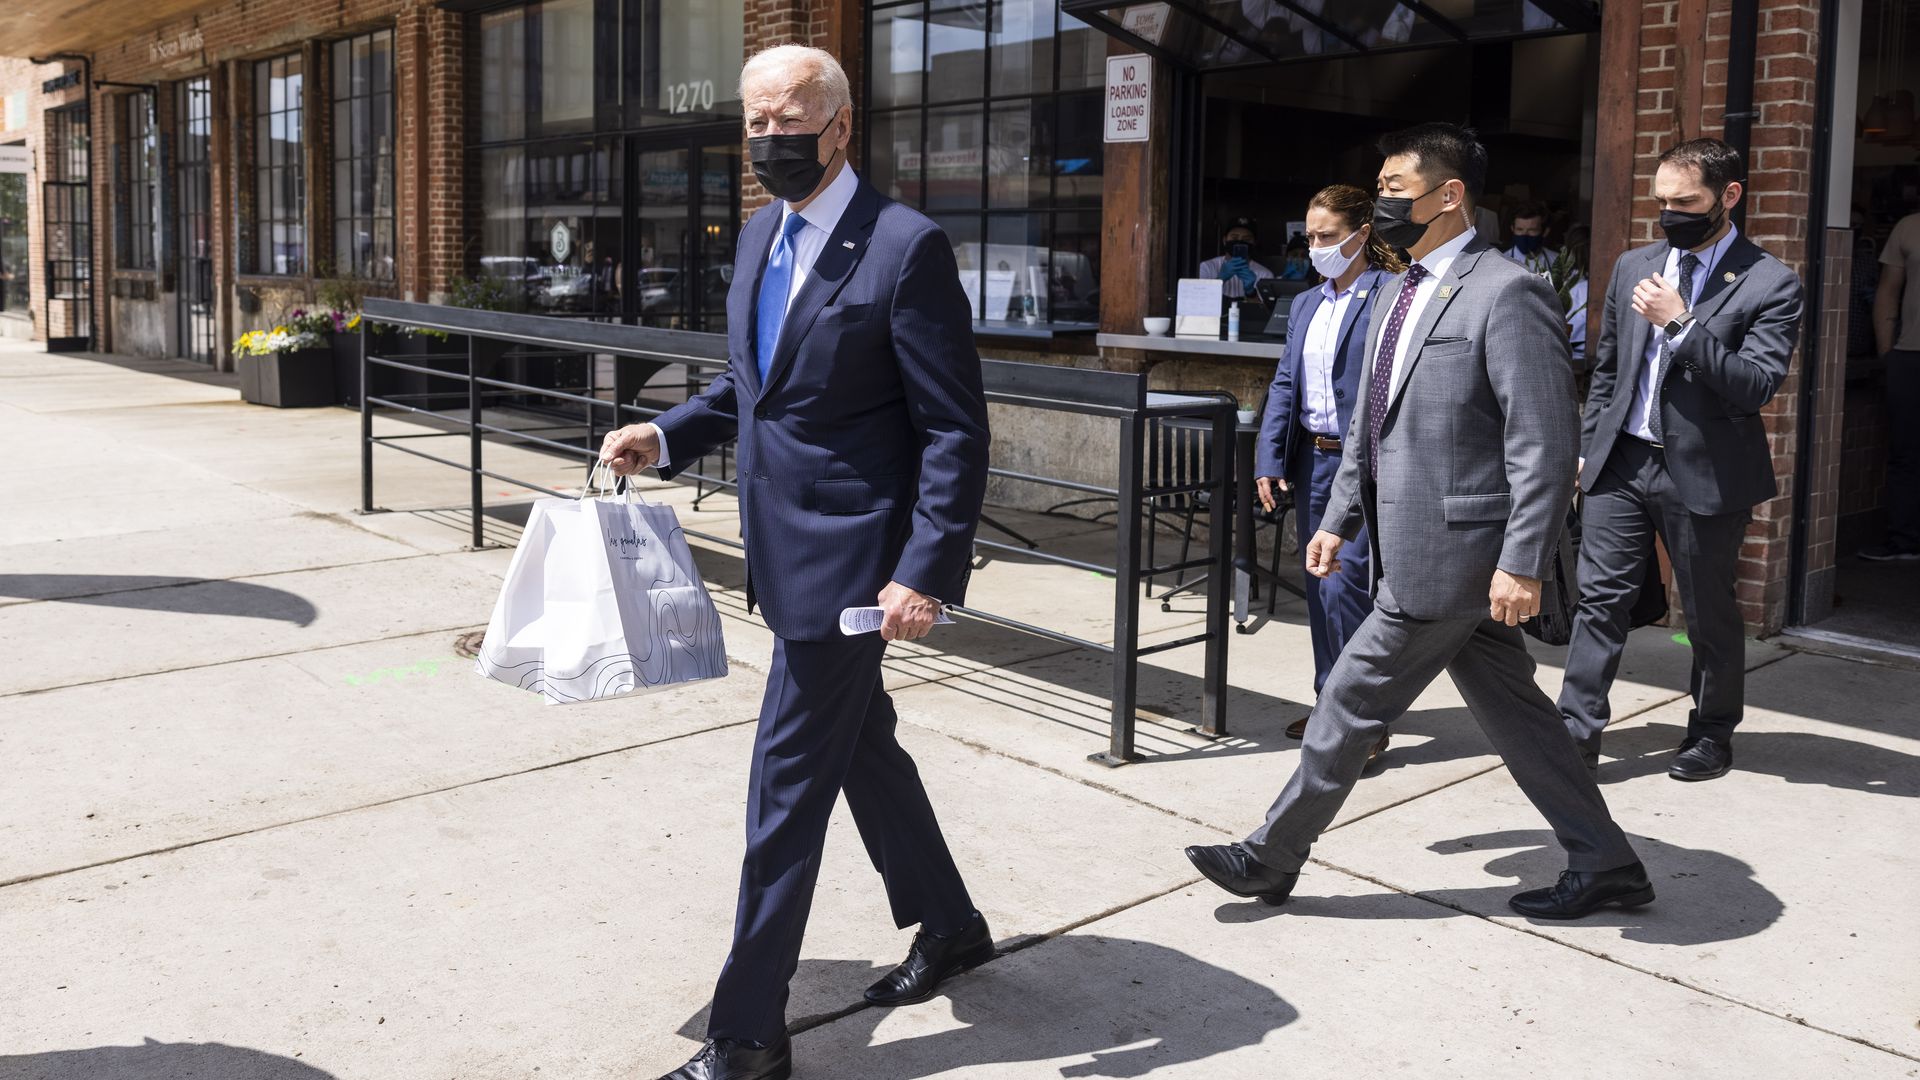 President Biden is seen leaving a Mexican restaurant after picking up some takeout food on Cinco de Mayo.